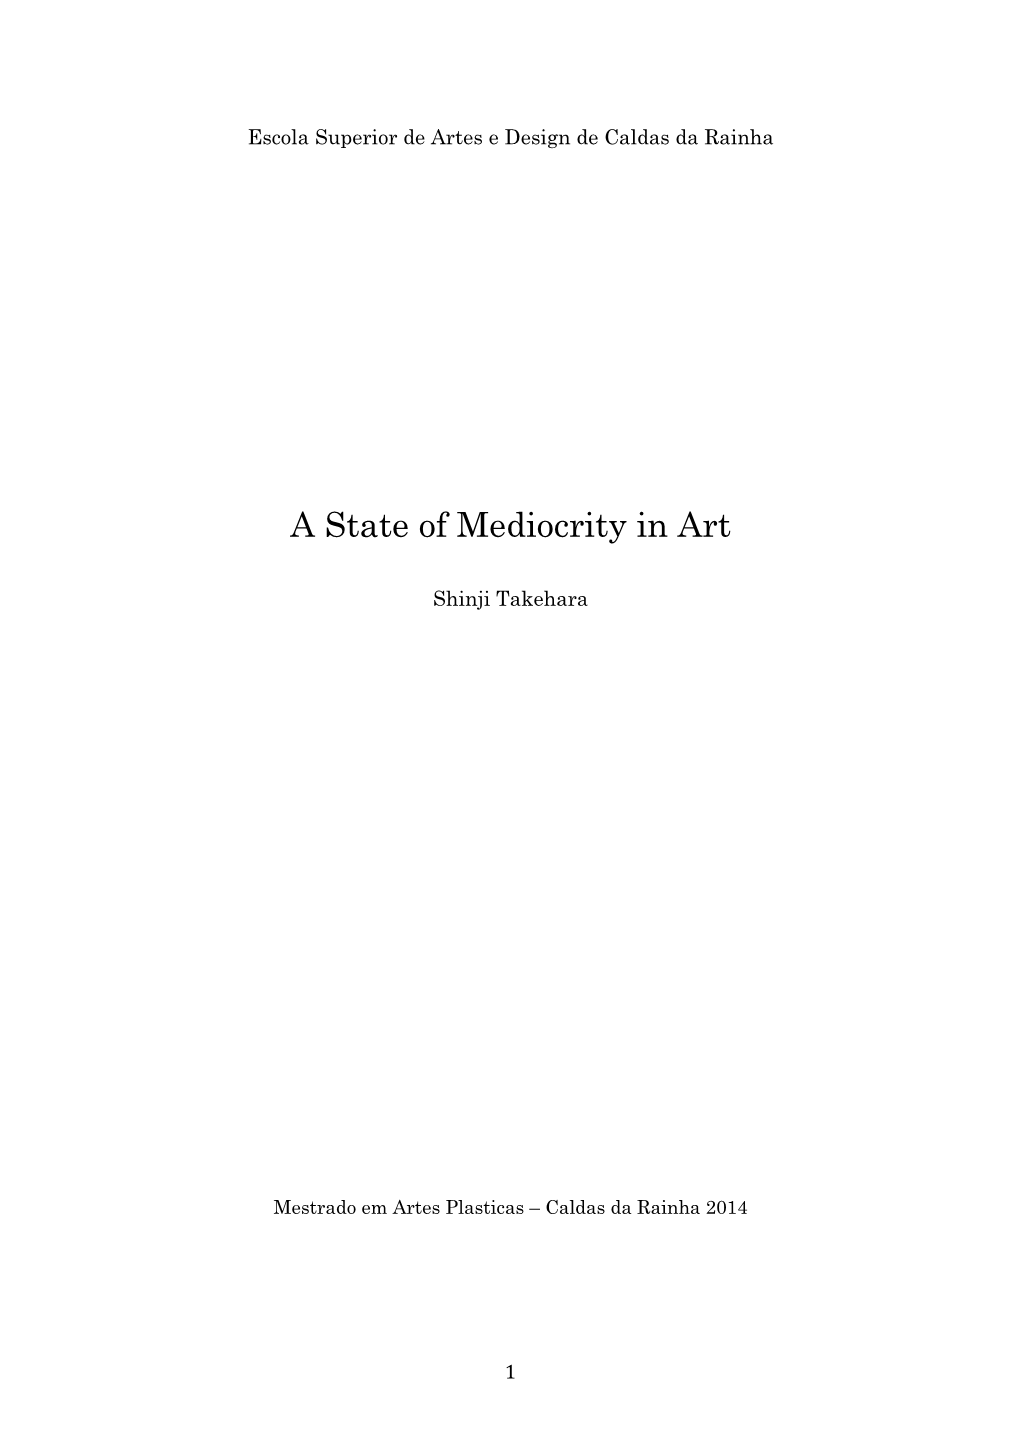 A State of Mediocrity in Art